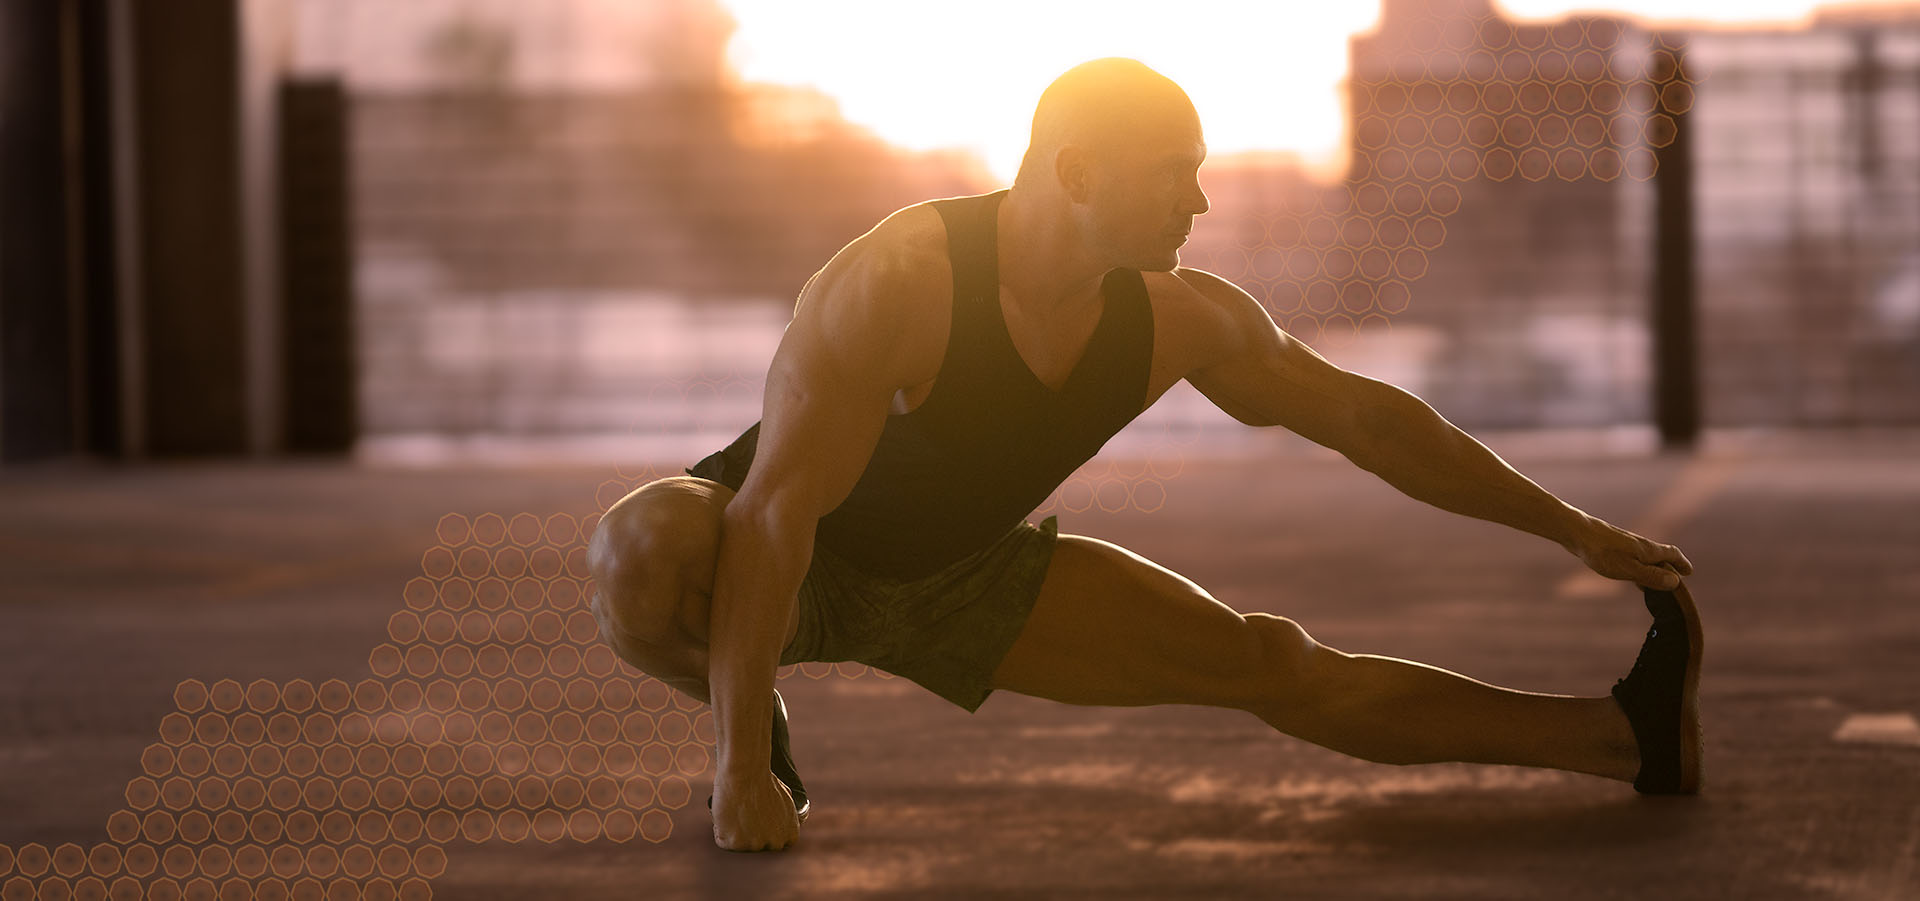 Joel Griffin, lead trainer with Titan Bodybuilding, stretching during the Golden Hour.